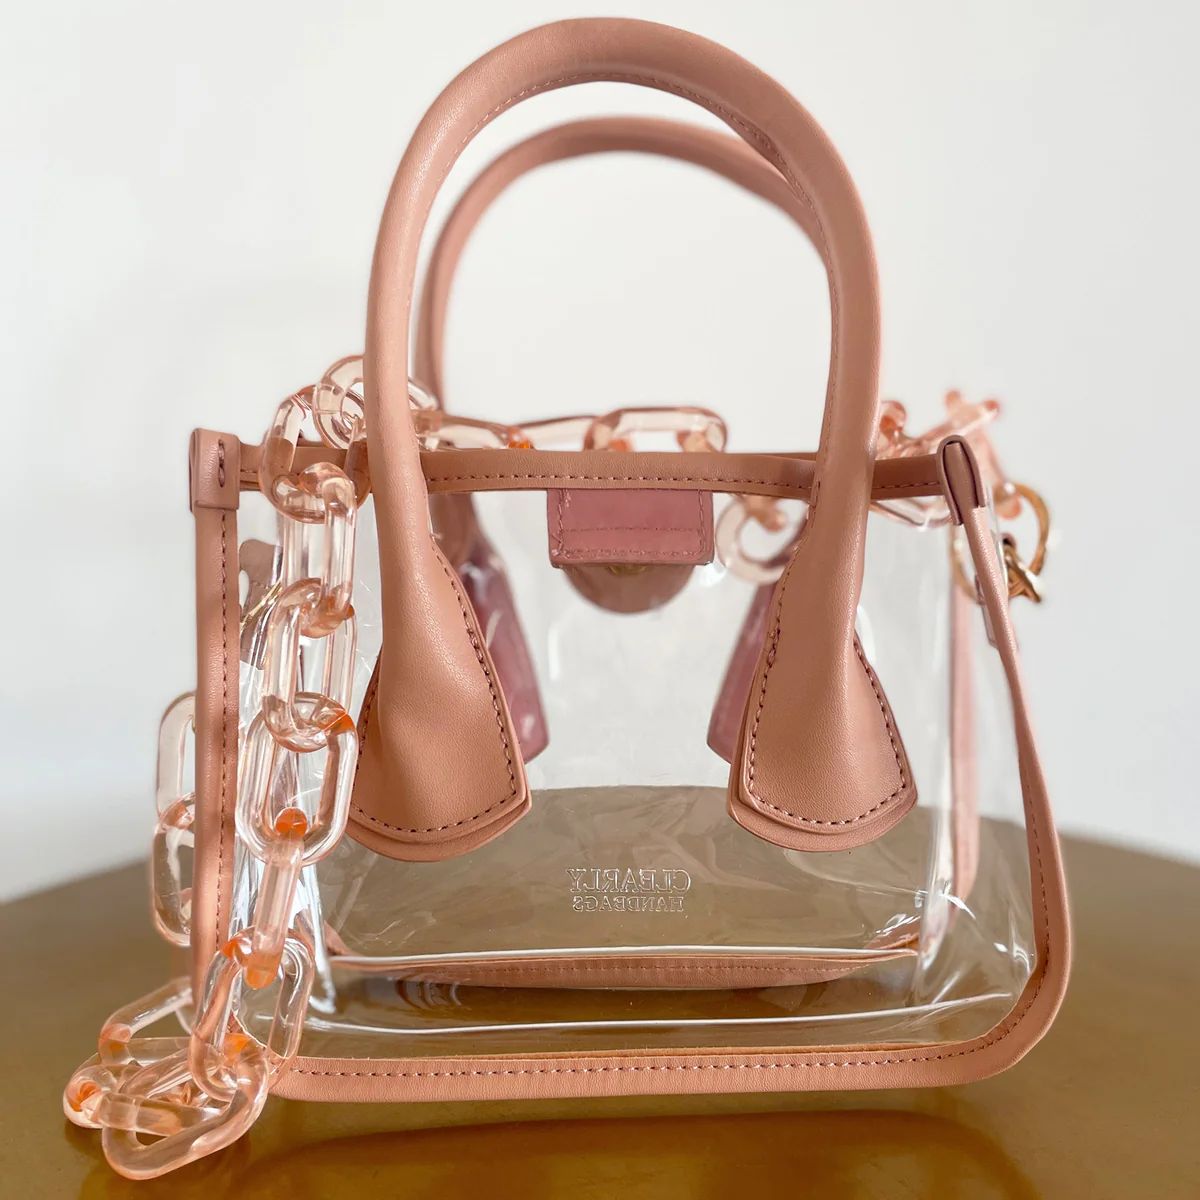 The Molly by Clearly Handbags | Support HerStory